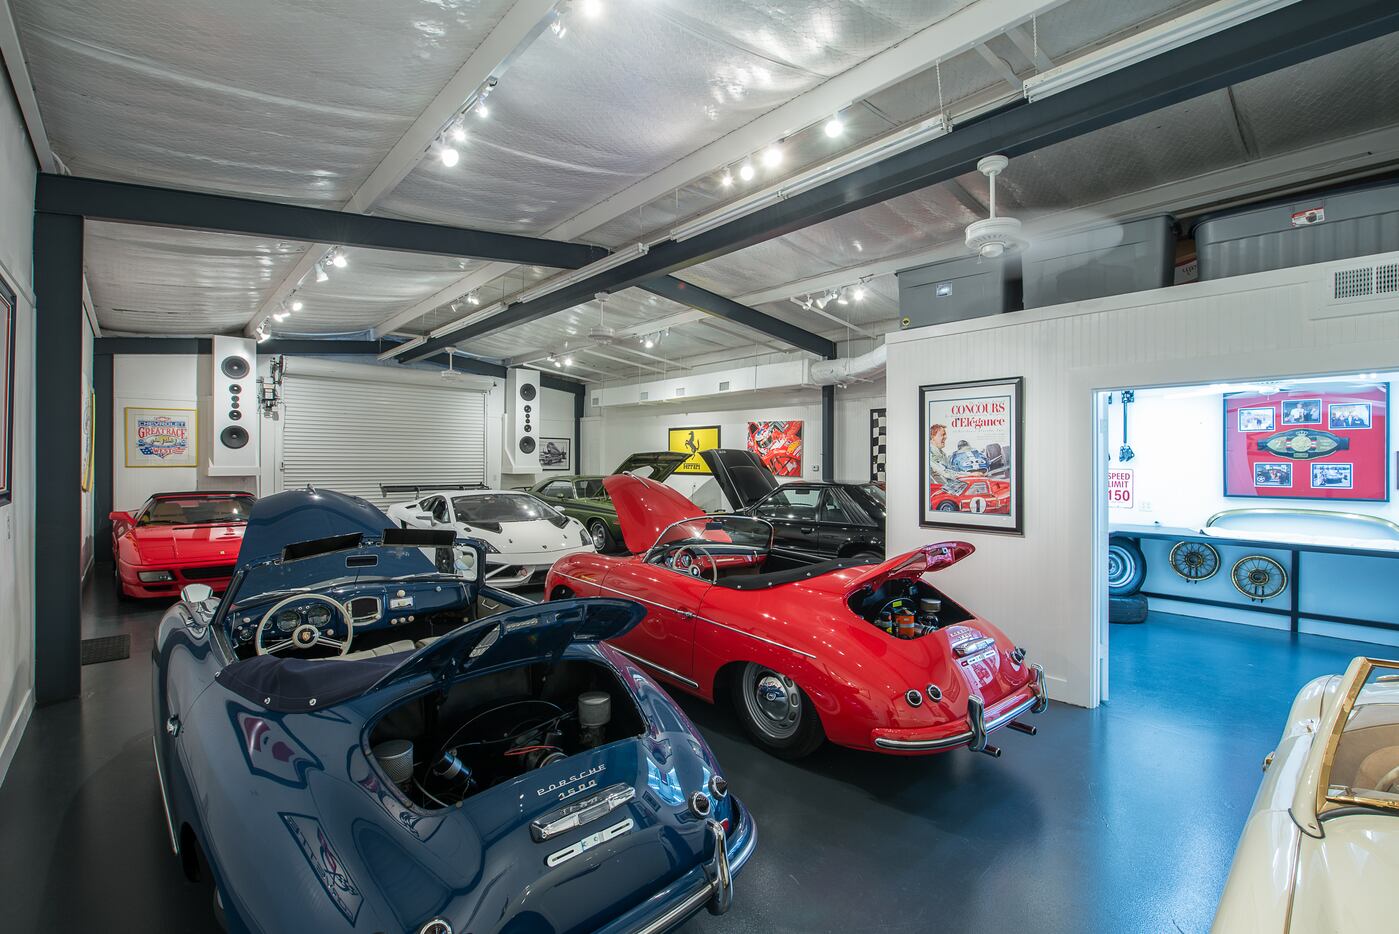 The Murphy estate has garage space for 20 cars.